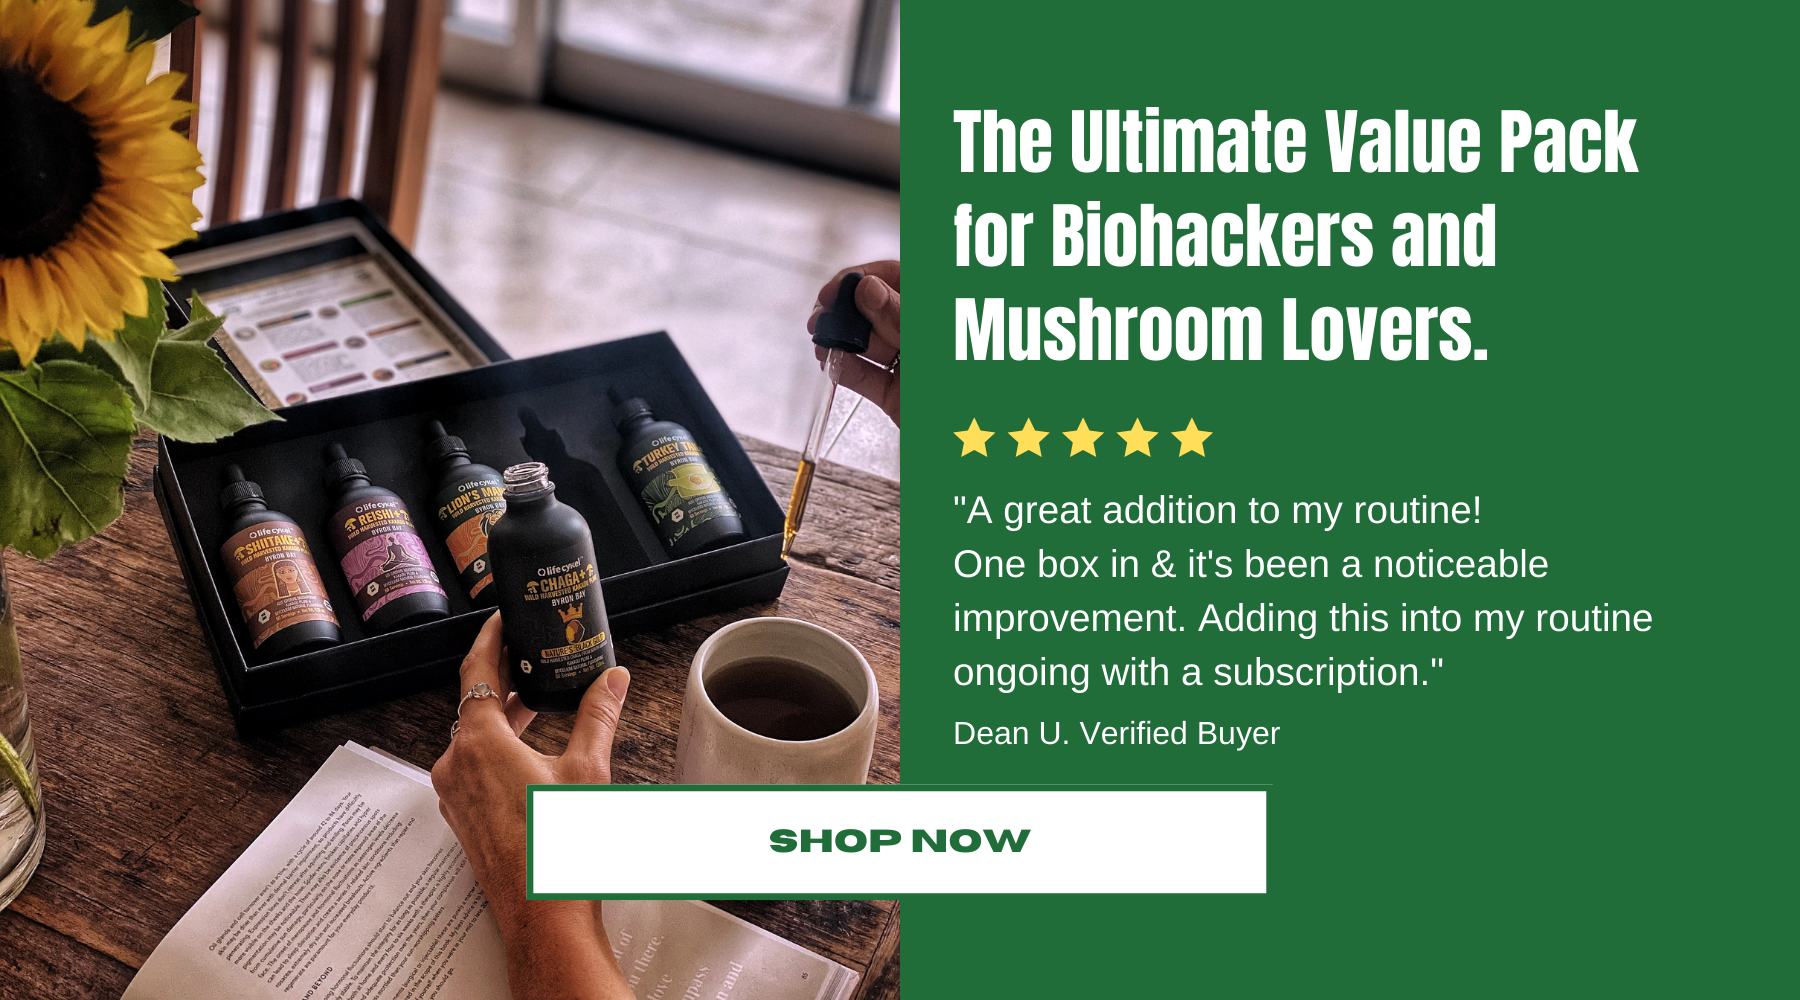 The ultimate value pack for biohackers and mushroom lovers